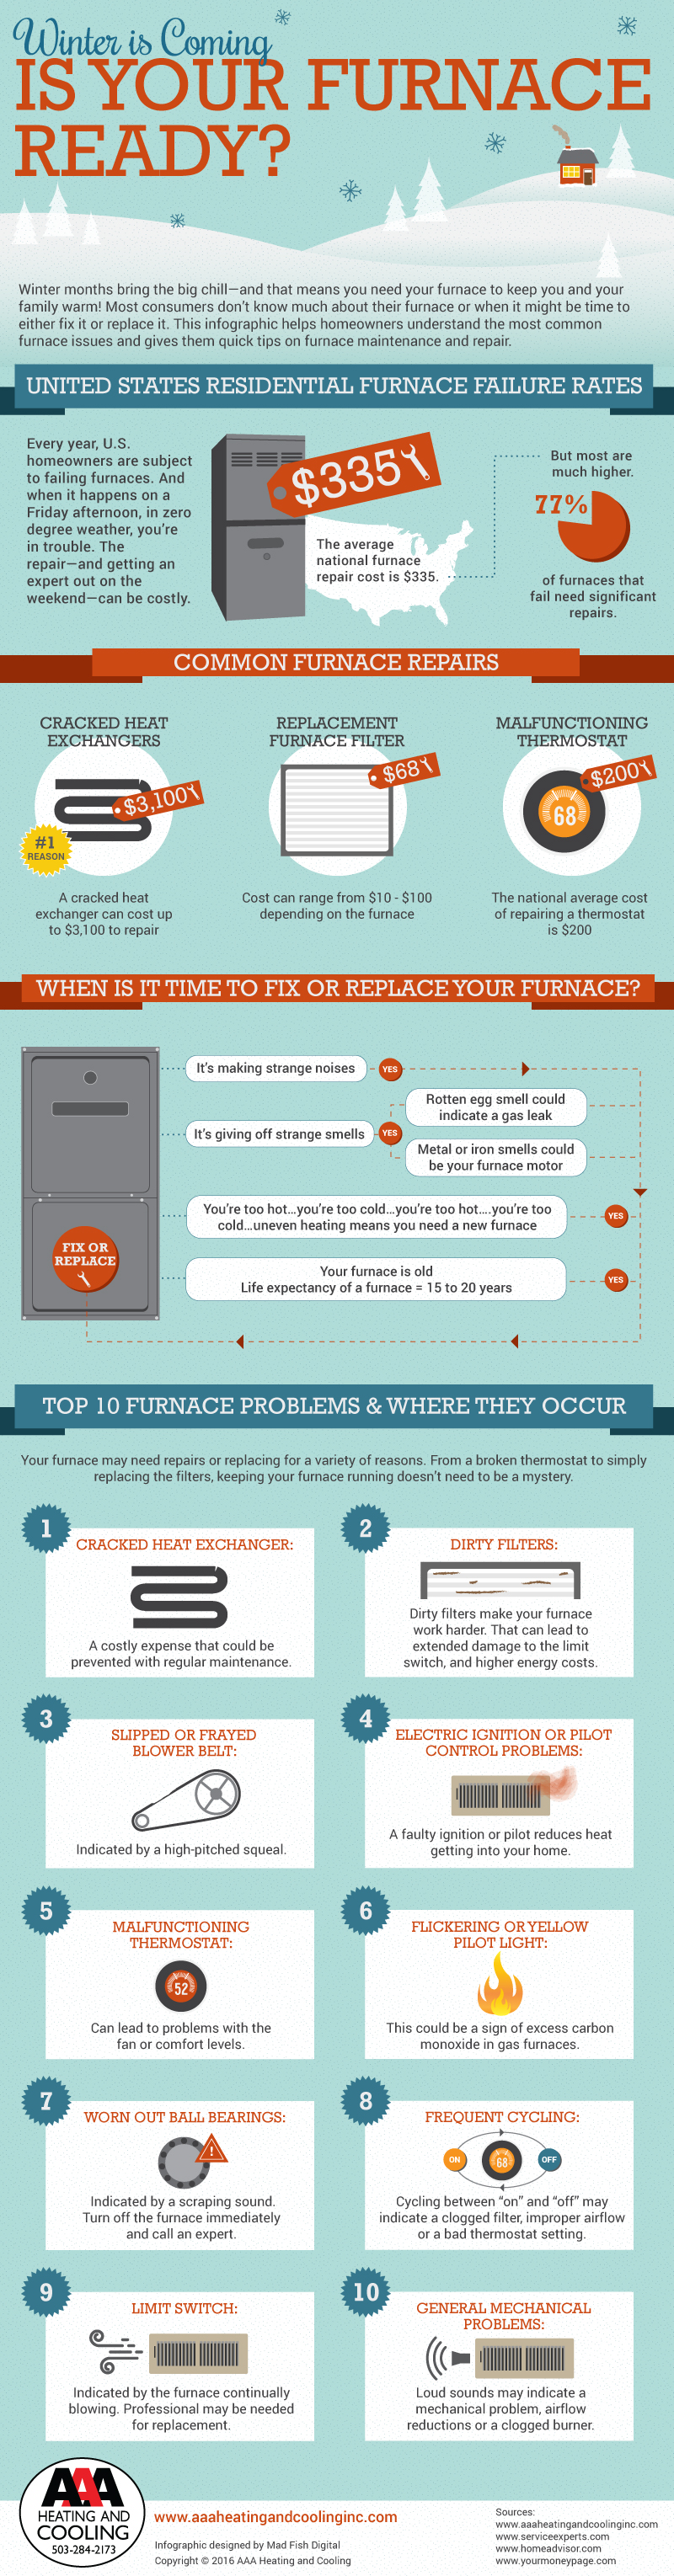 Winter Is Coming - Is Your Furnace Ready? 